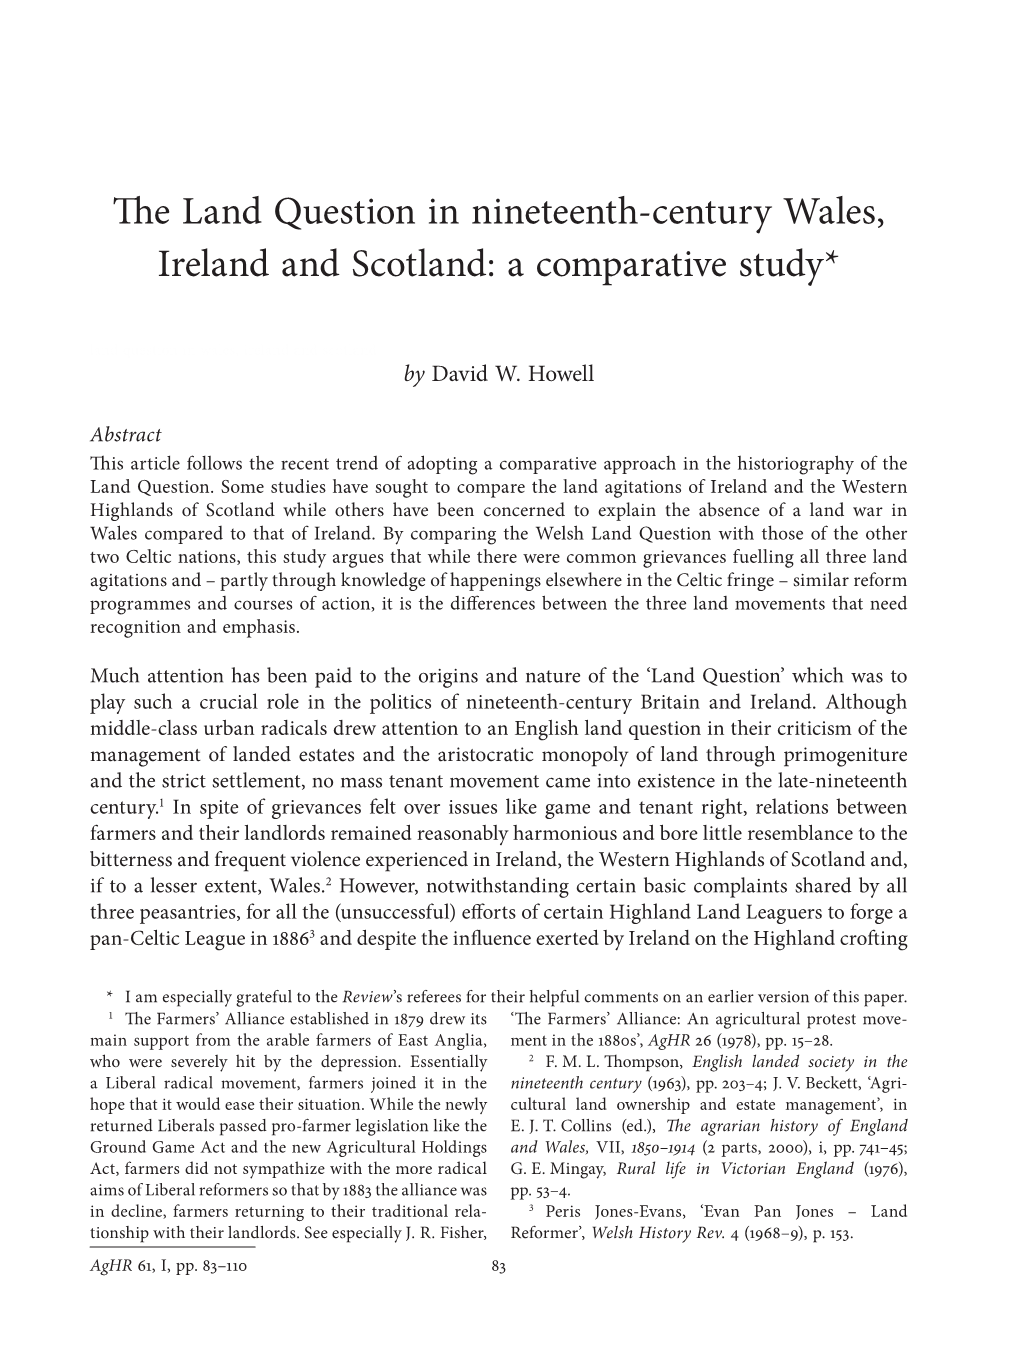 The Land Question in Nineteenth-Century Wales, Ireland and Scotland: a Comparative Study*